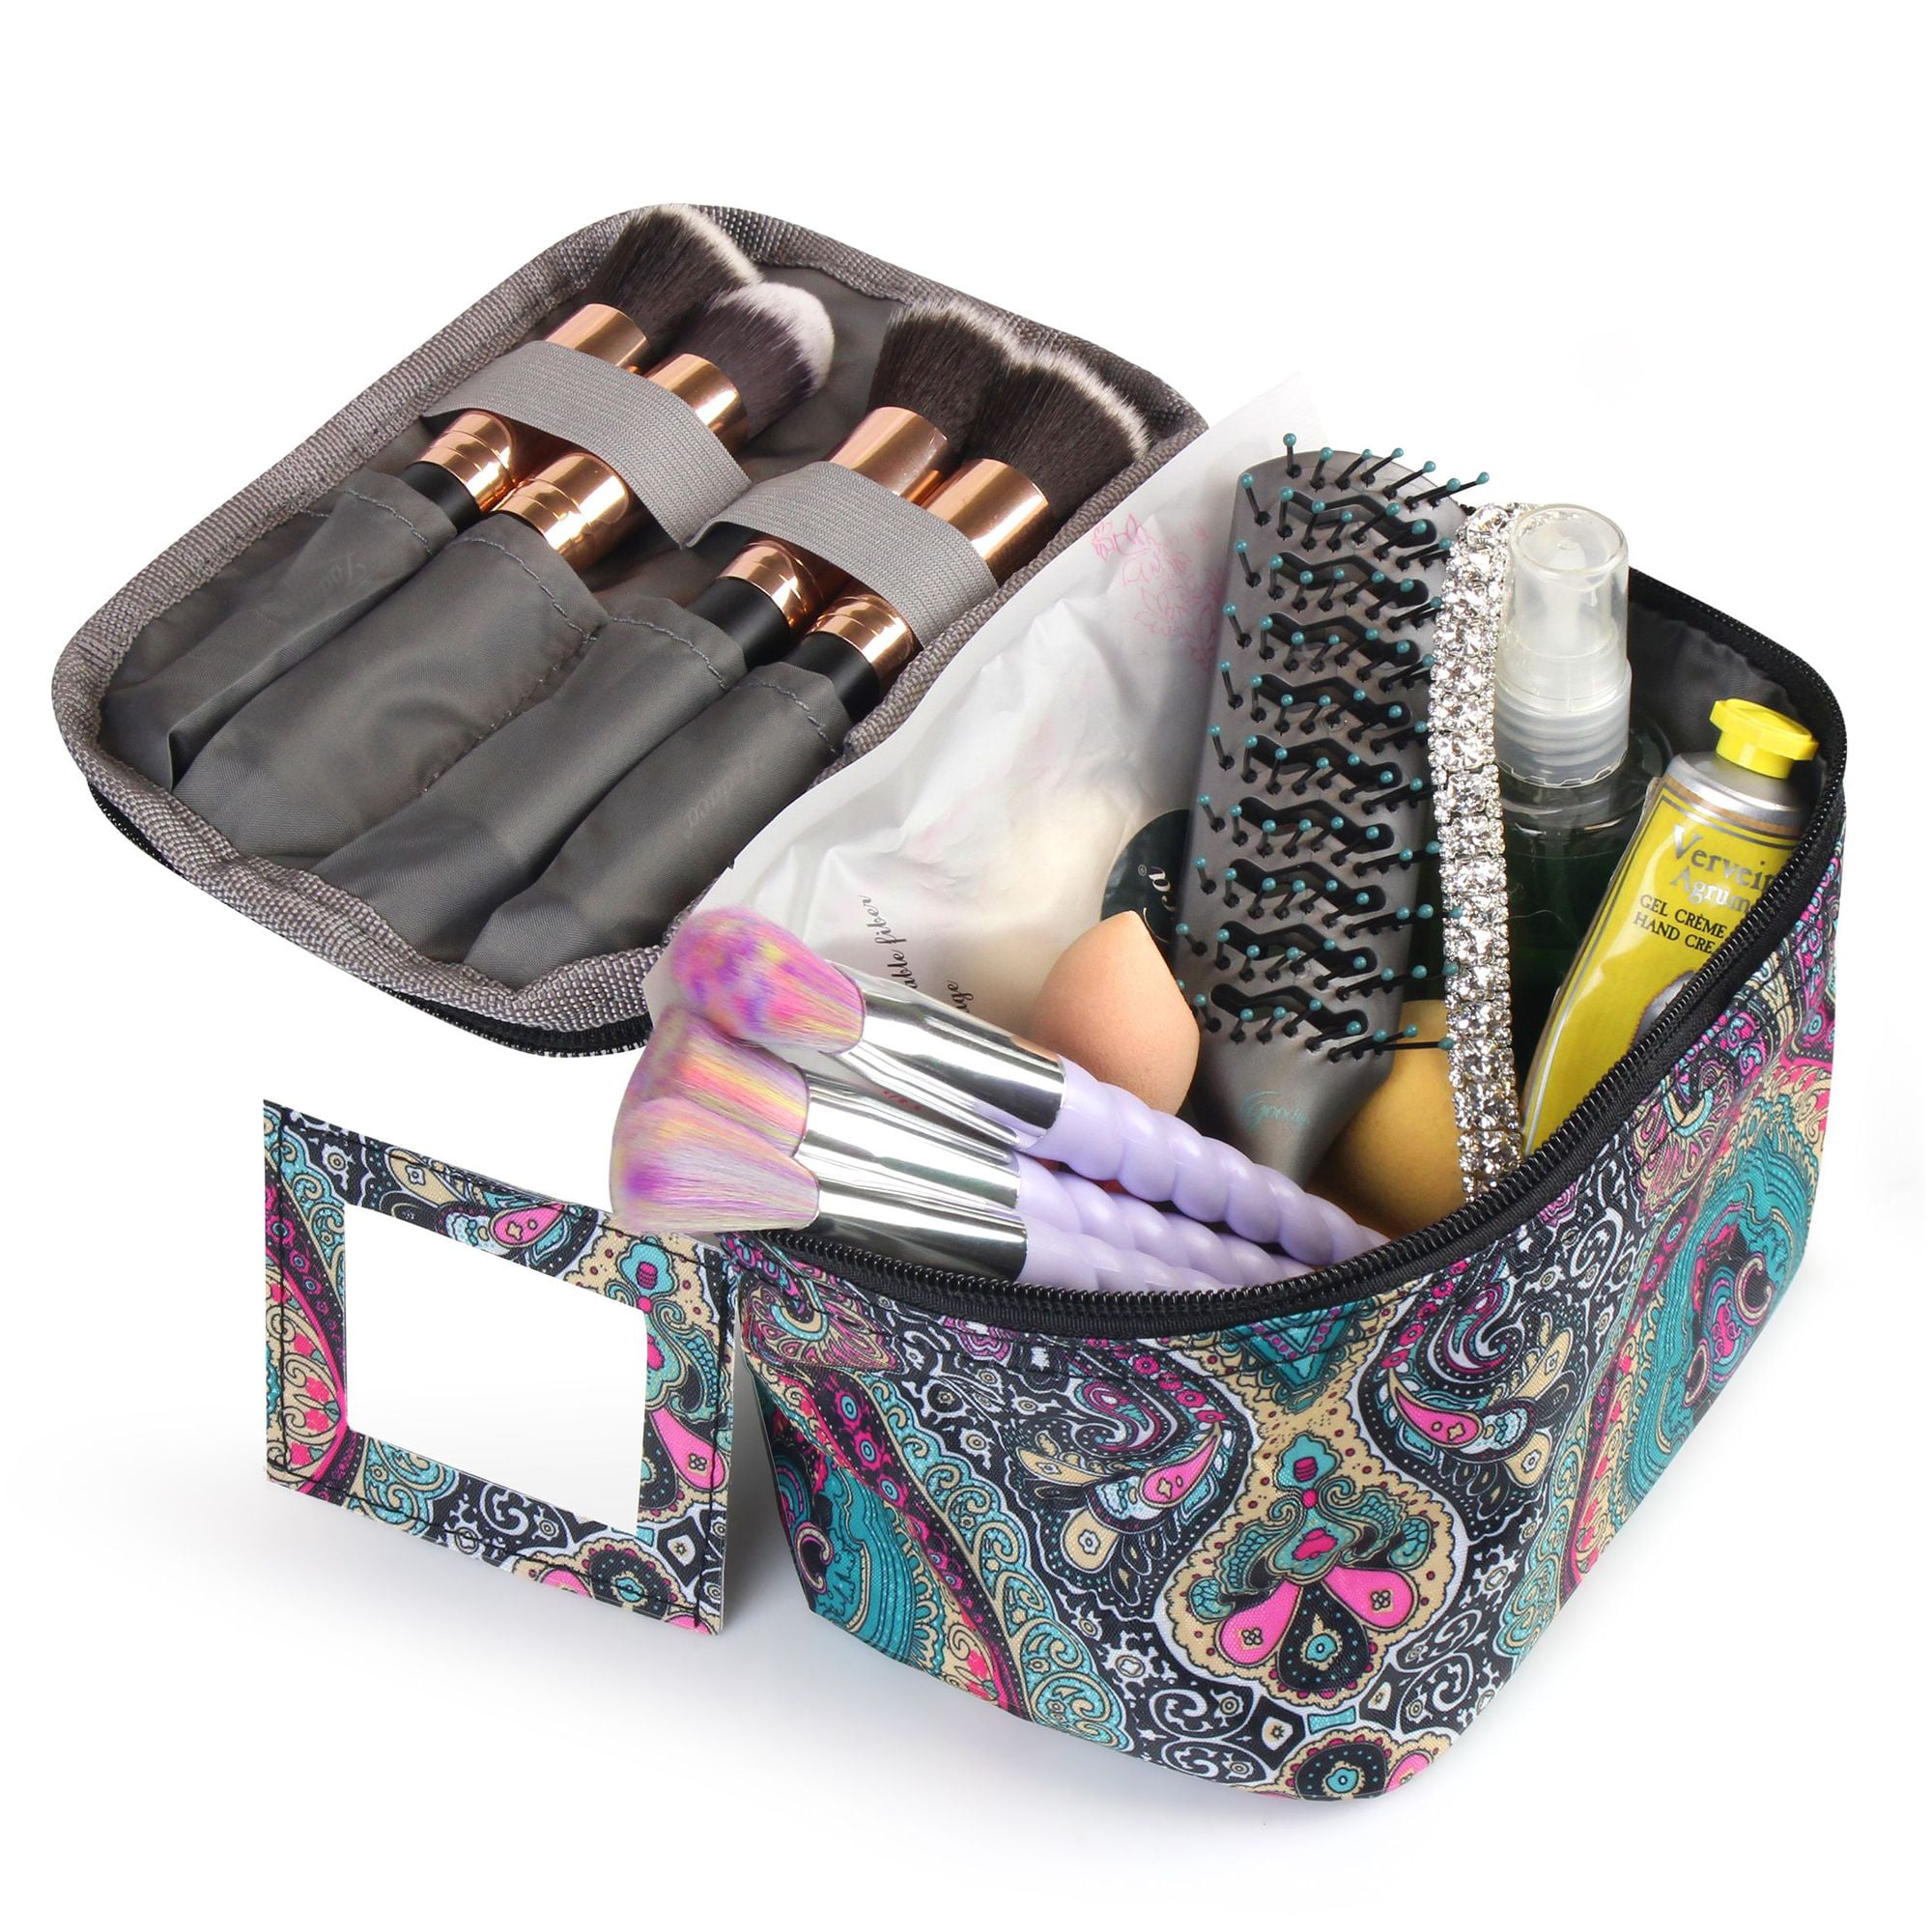 inexpensive travel cosmetic bags